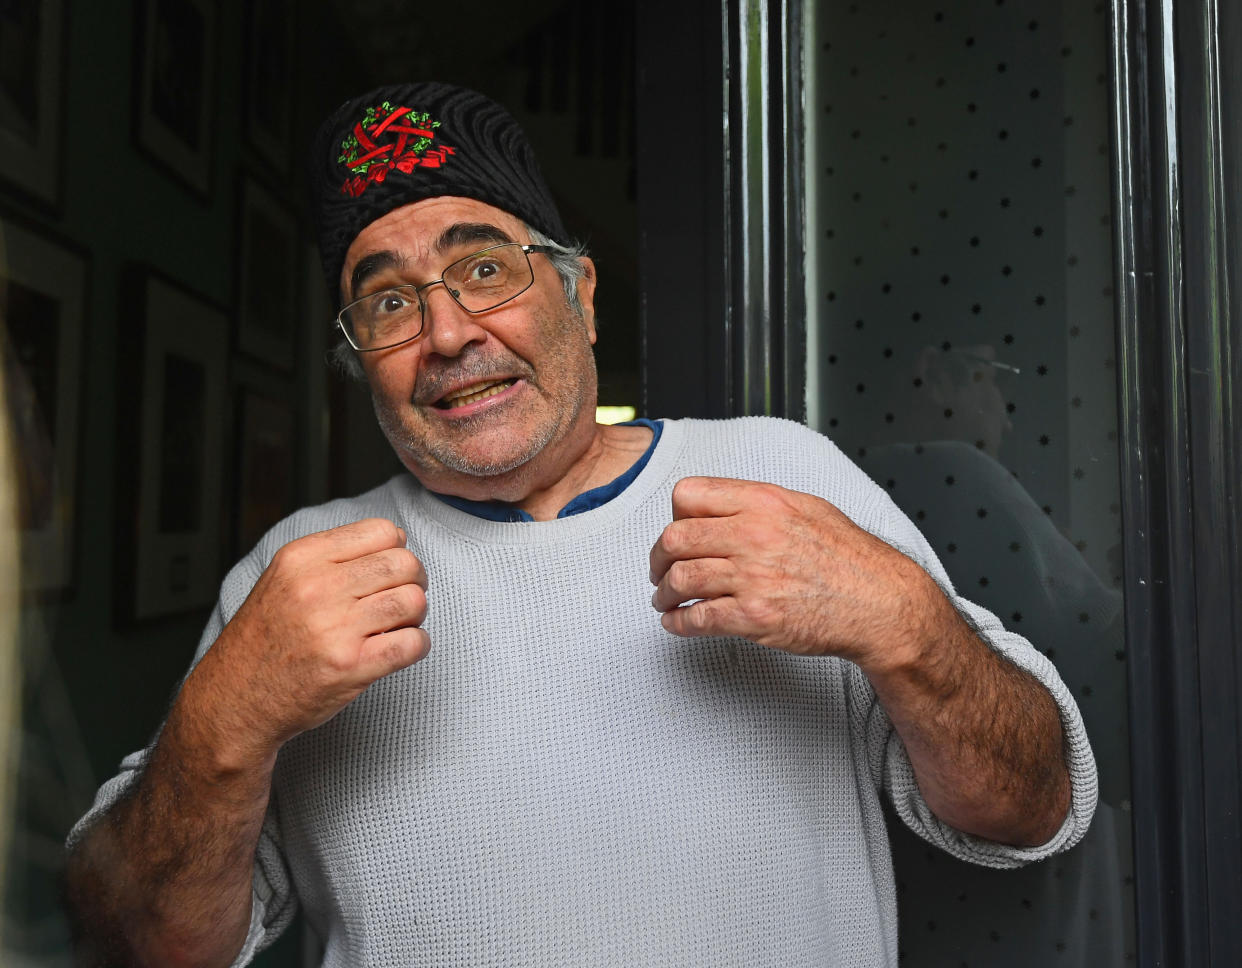 Danny Baker speaking at his London home after he was fired by BBC Radio 5 Live for tweeting a joke about the Duke and Duchess of SussexÕs son using a picture of a monkey. (Photo by Victoria Jones/PA Images via Getty Images)